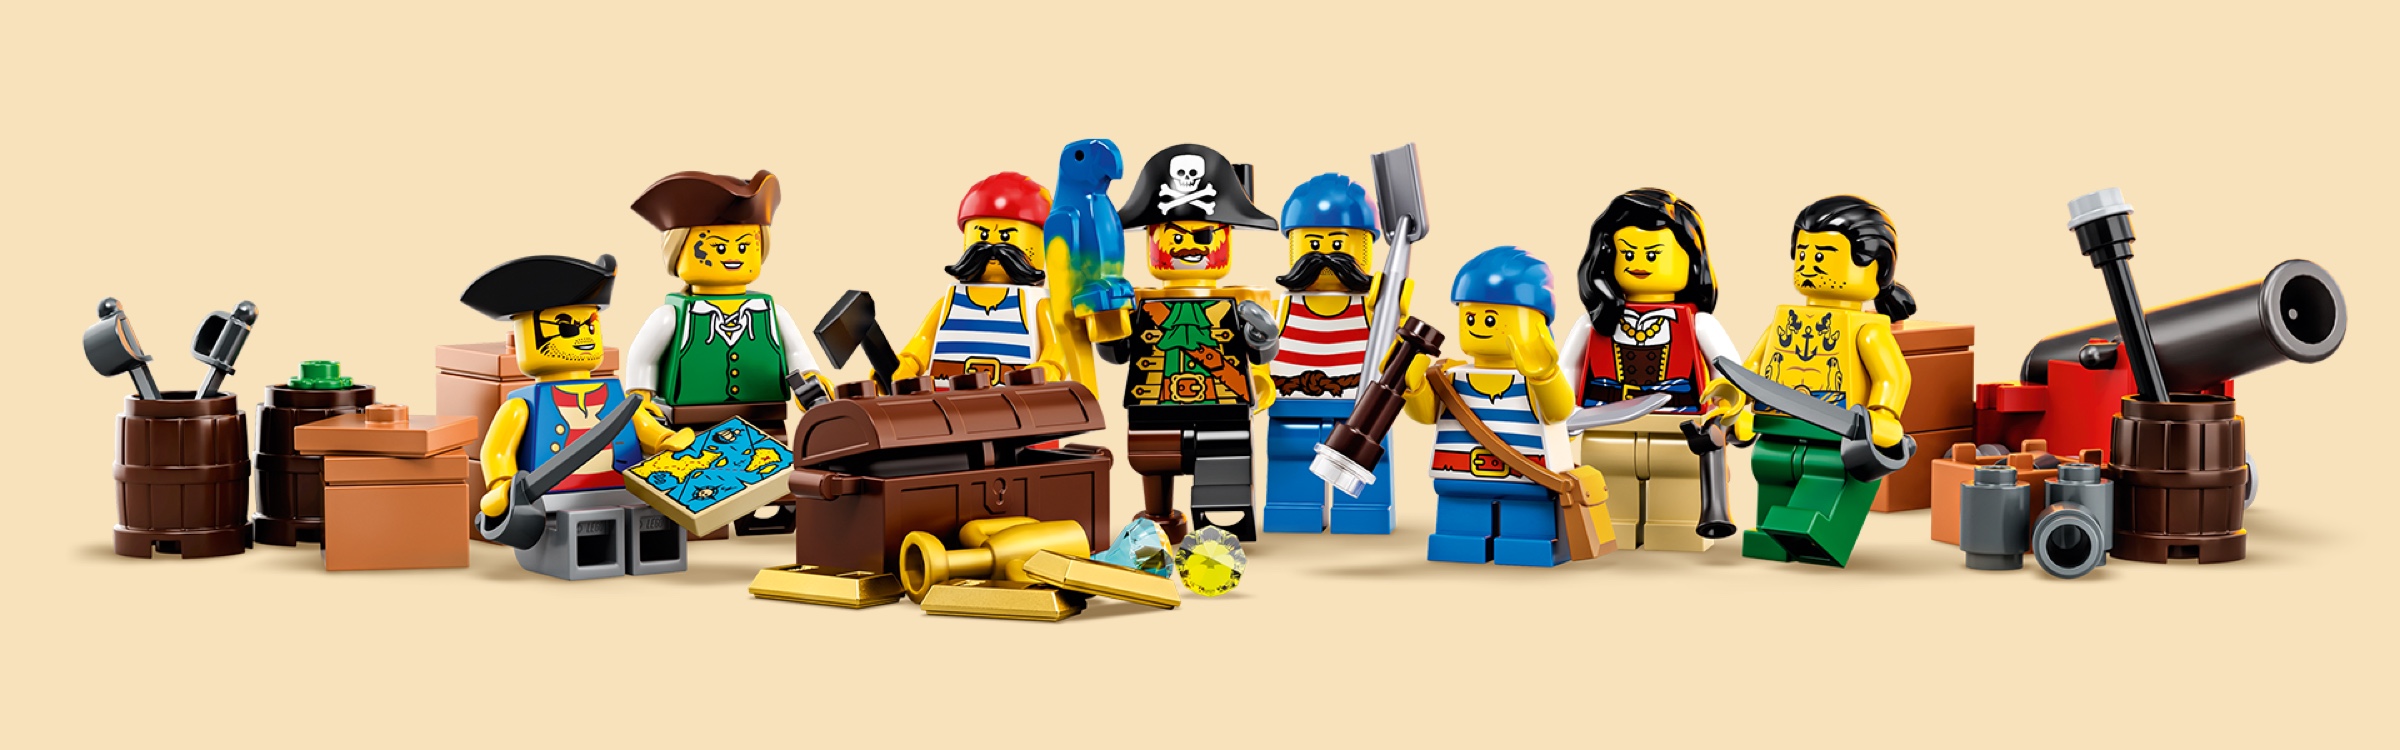 Starboard MINIFIGURE ONLY from LEGO 21322 Ideas Pirates of Barracuda Bay 